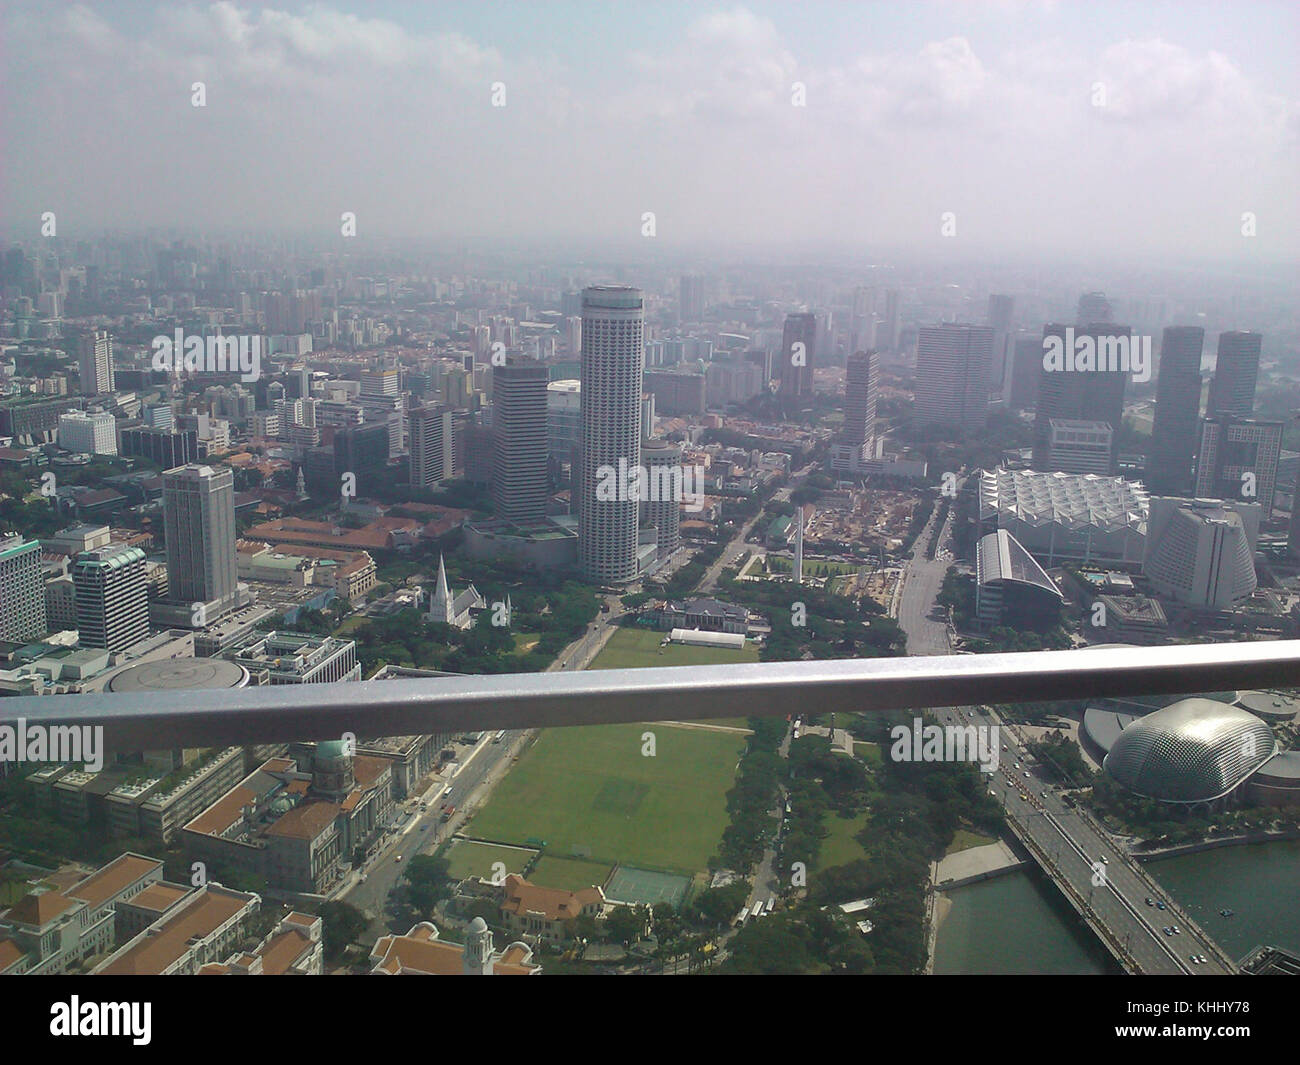 A spectacular view of the Civic District of Singapore from 1-Altitude Gallery - 20110812 Stock Photo